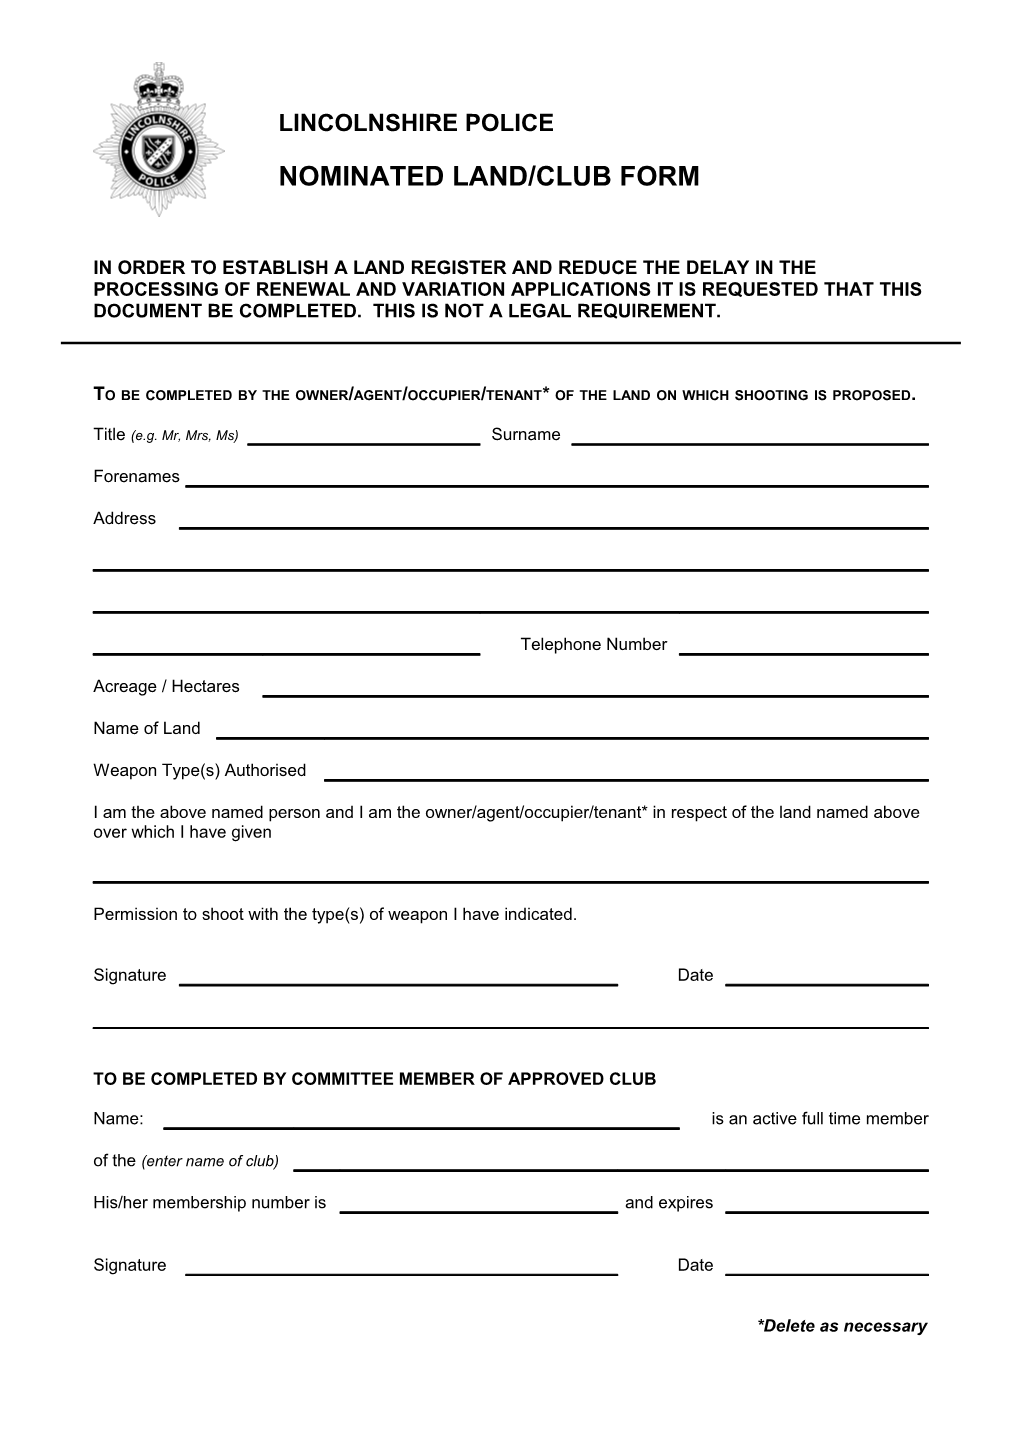 Nominated Land/Club Form